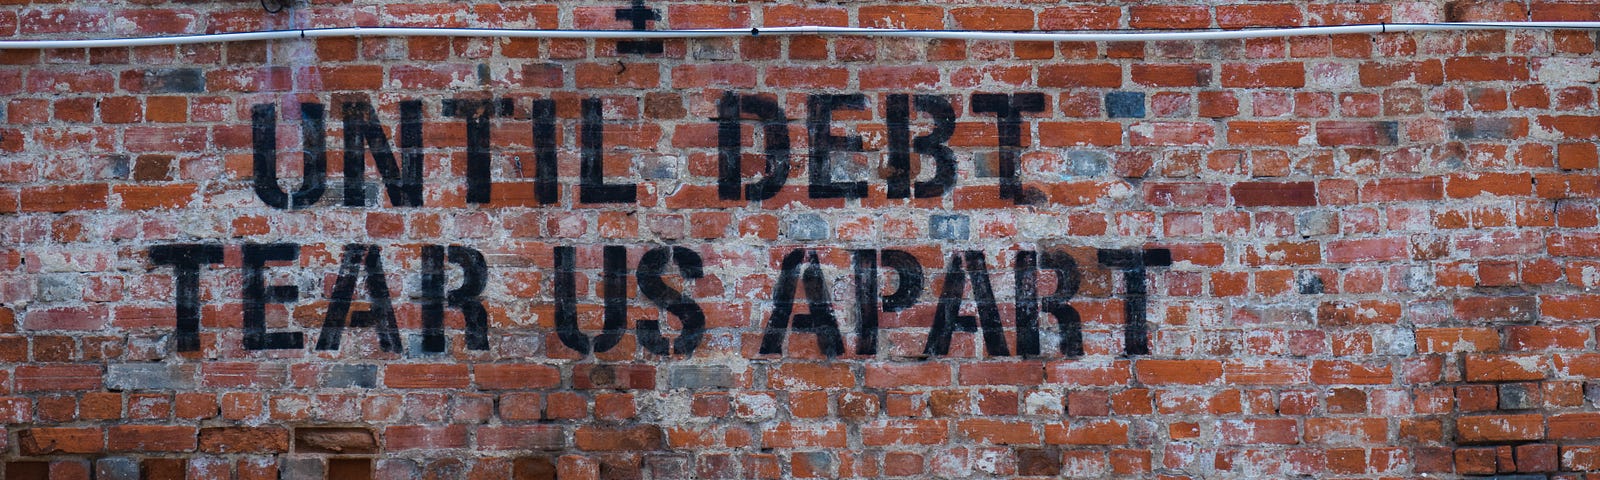 Red brick wall with a car parked in front of it. Text on the brick wall is black stencil grafitti that reads, “Until debt tear us apart” in all caps.